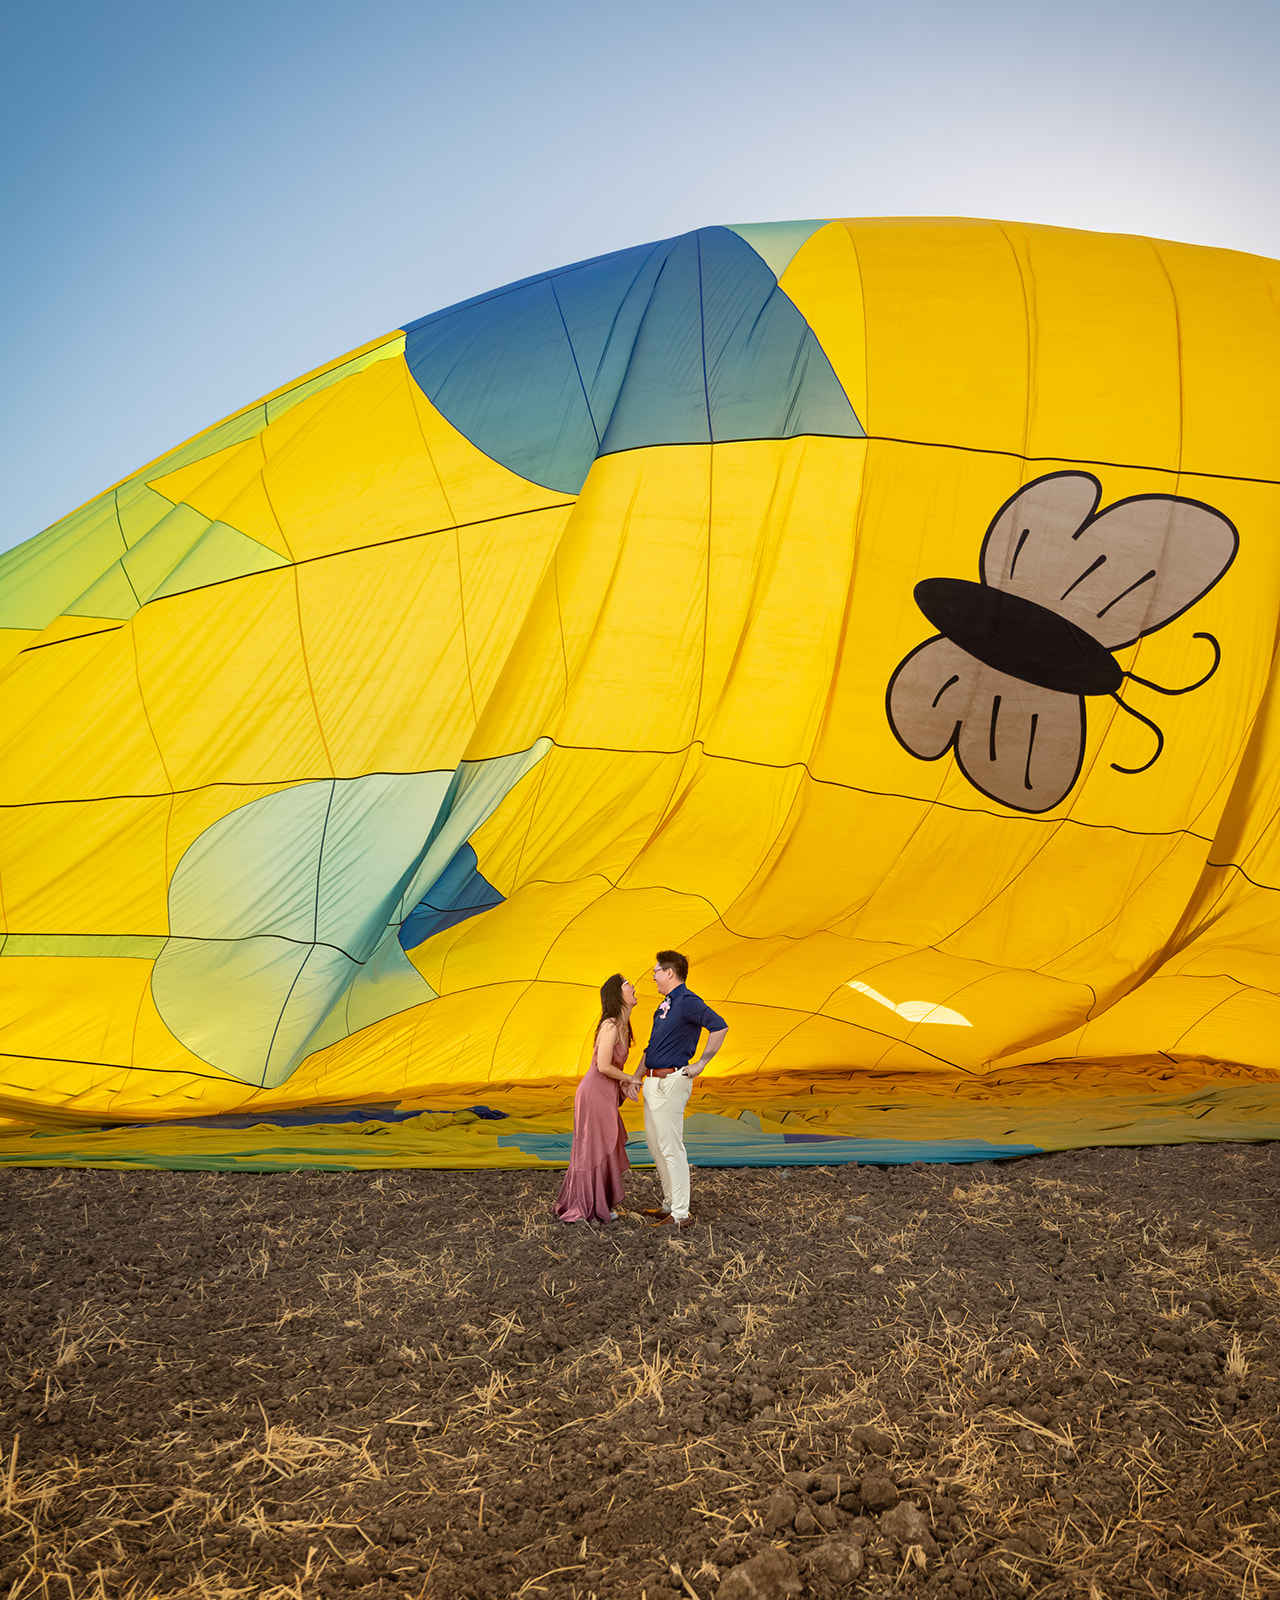 nonbinary person proposing to their girlfriend in front of yellow hot air balloon